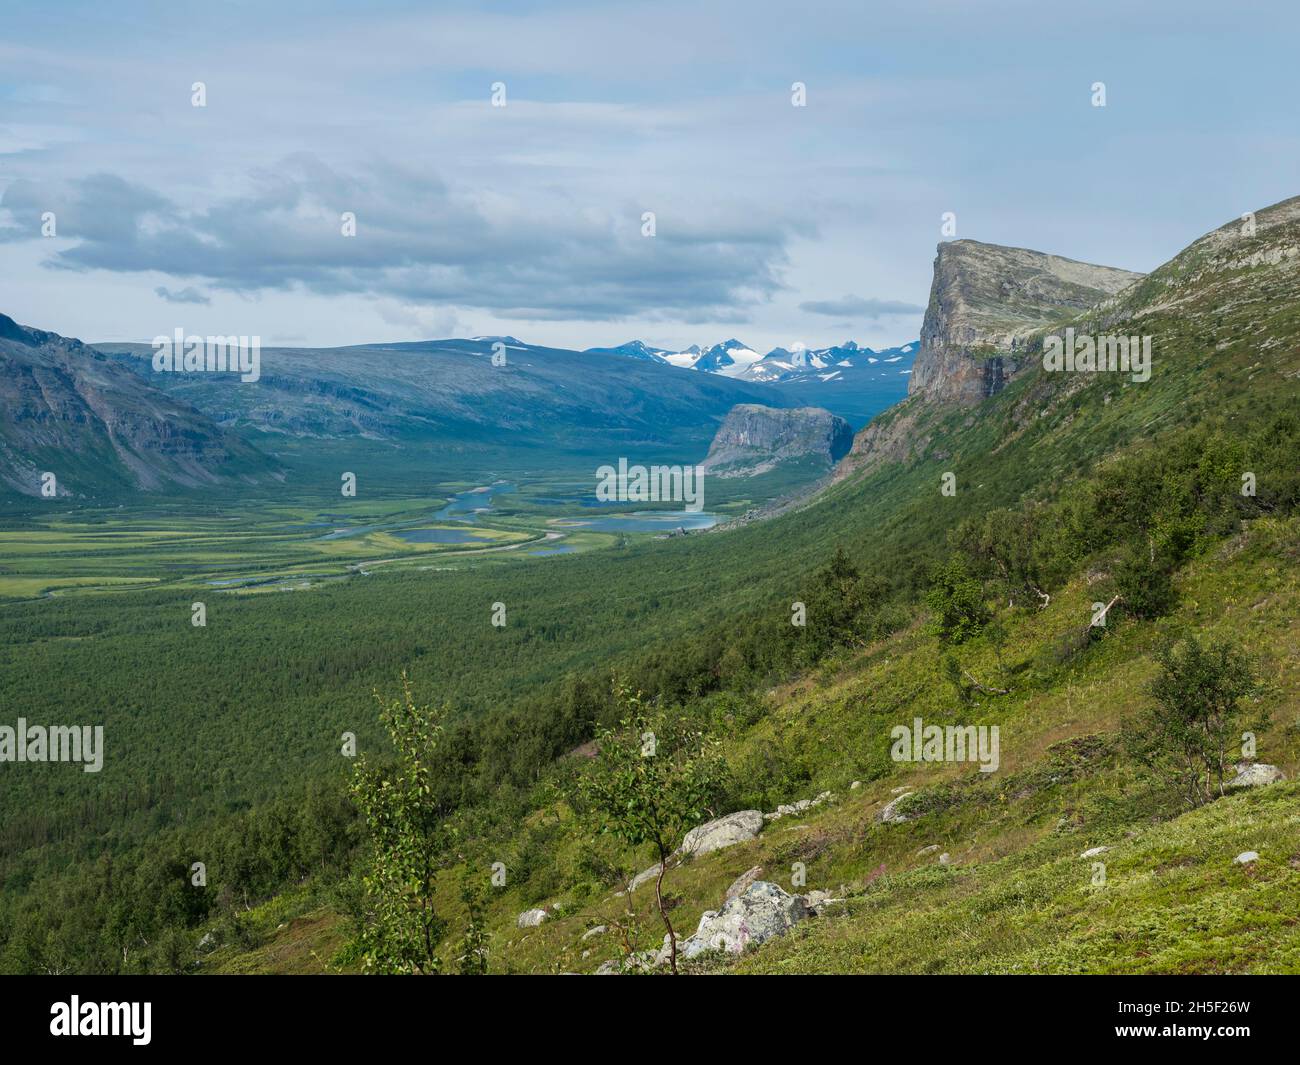 View on meandering glacial Rapadalen river delta valley at Sarek national park, Sweden Lapland with Skierffe rock peak, snow capped mountains and Stock Photo